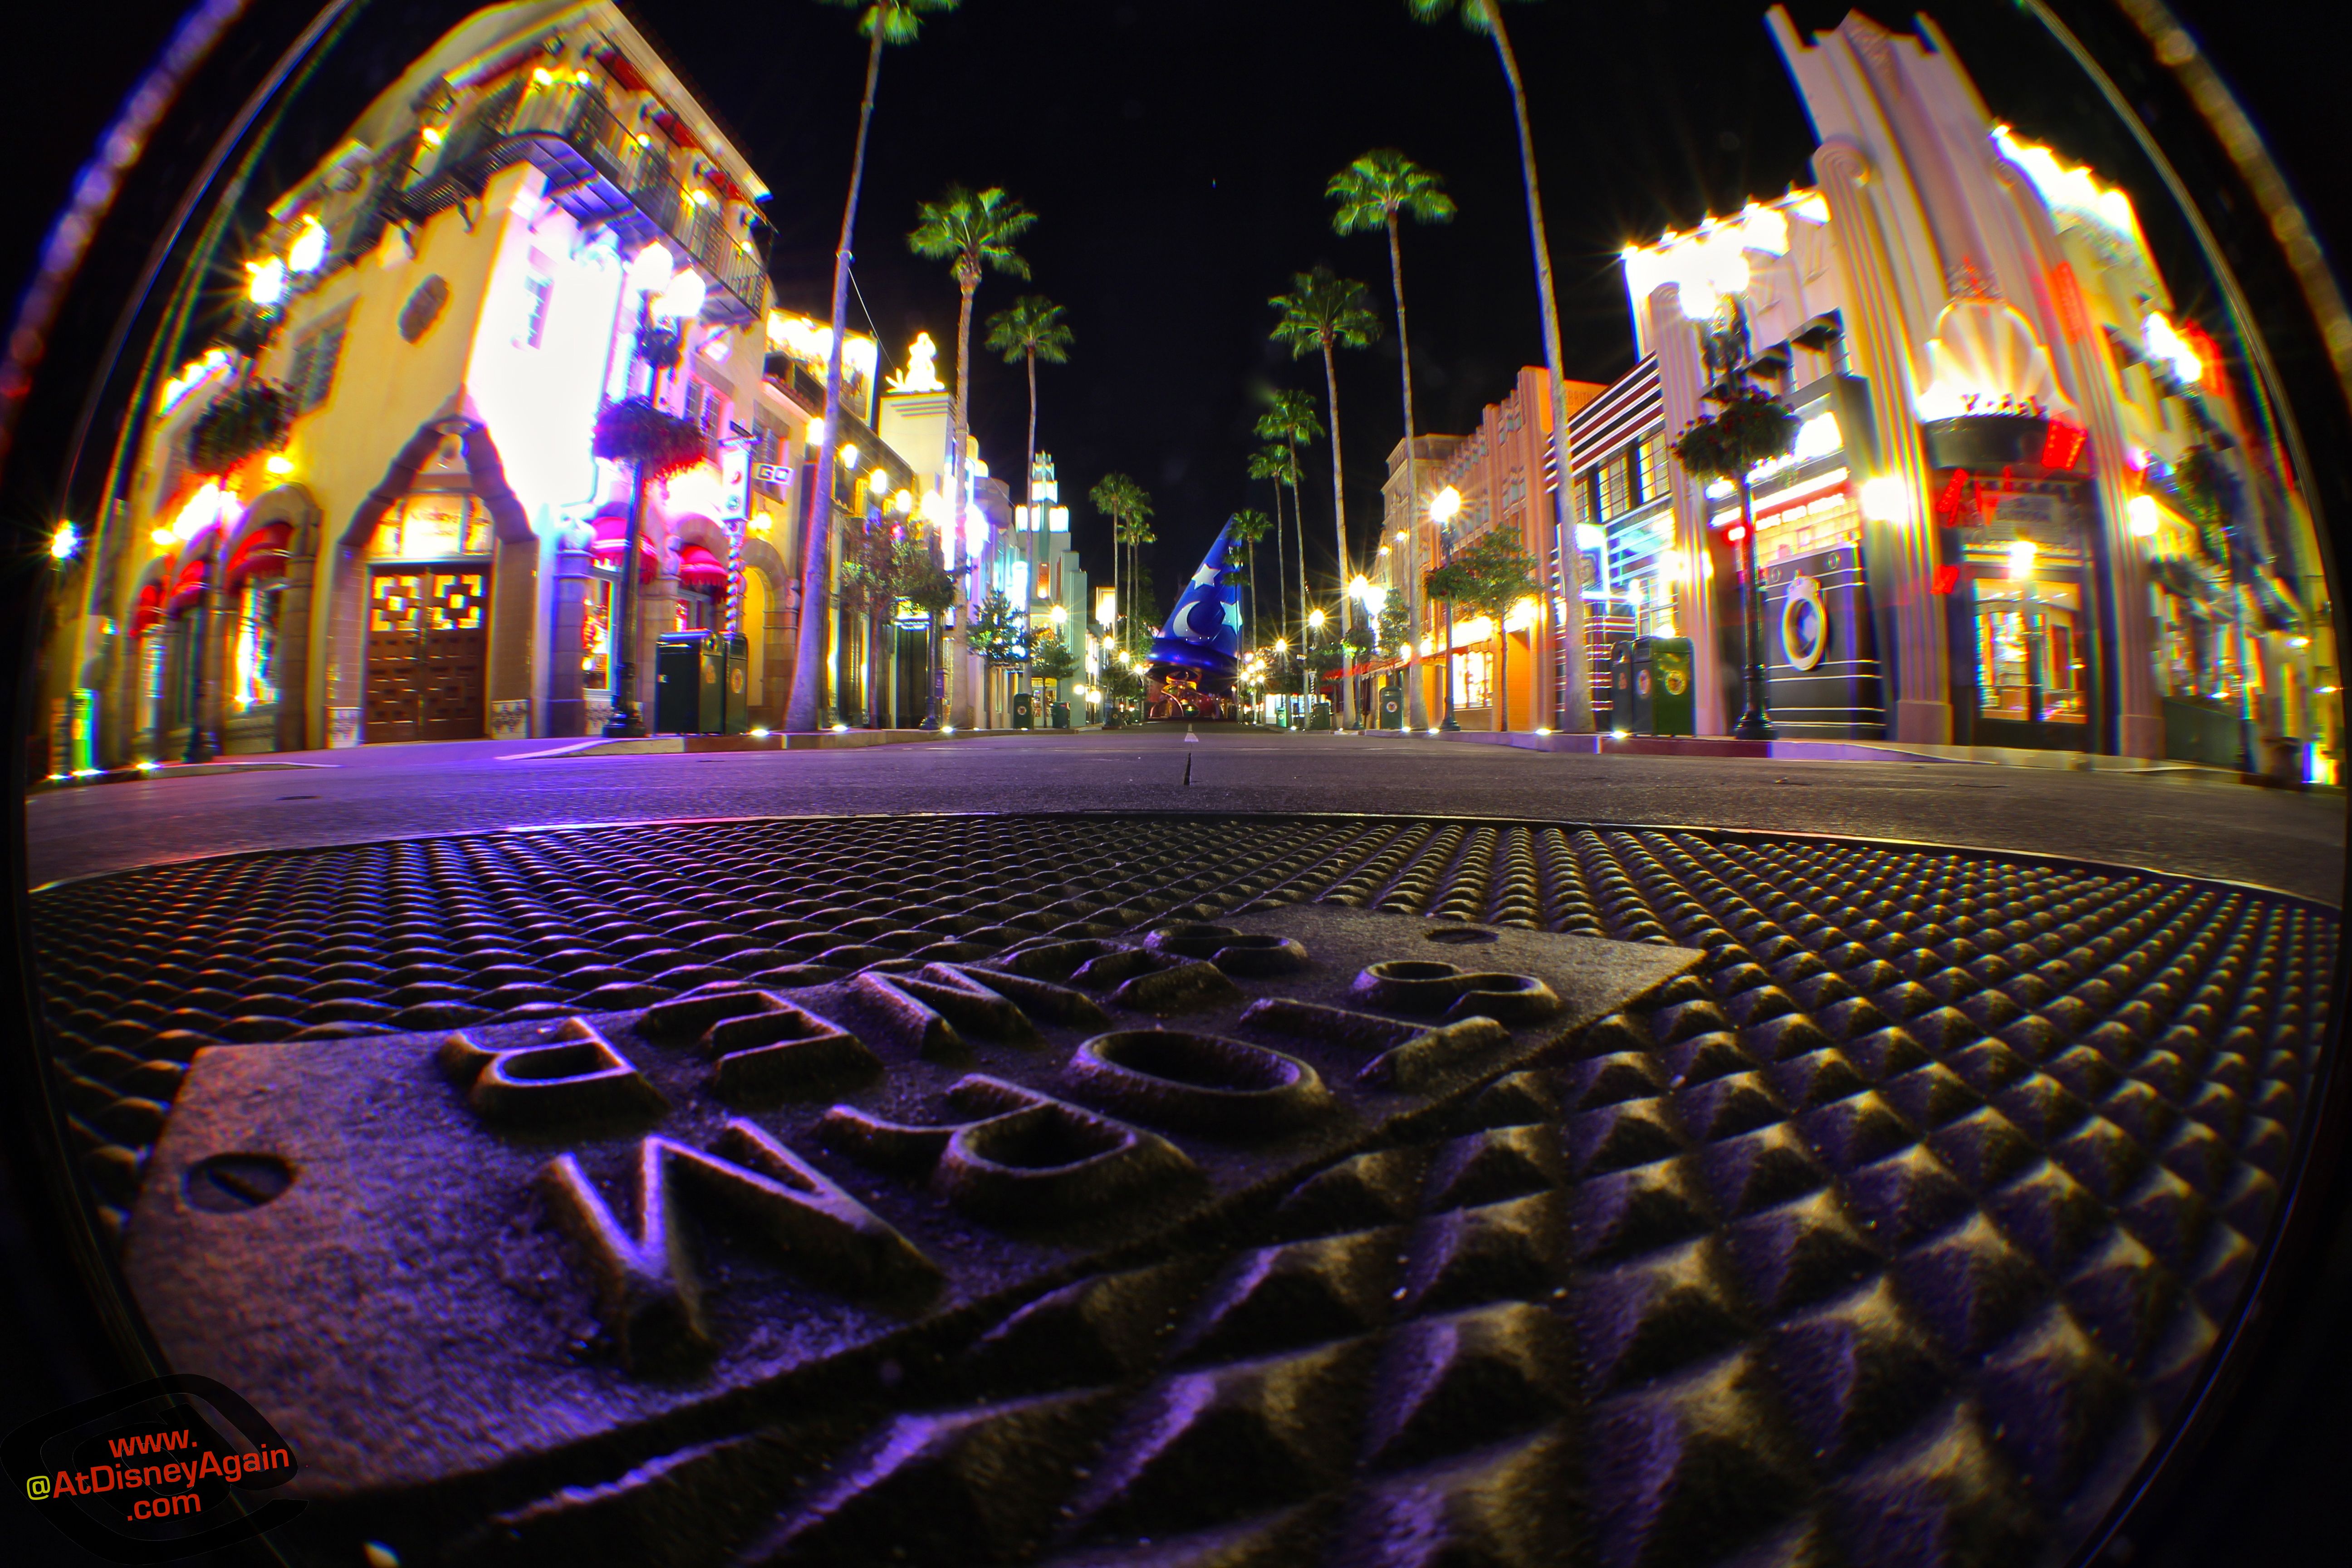 Hollywood Wallpaper, HD Quality Hollywood Image, Hollywood